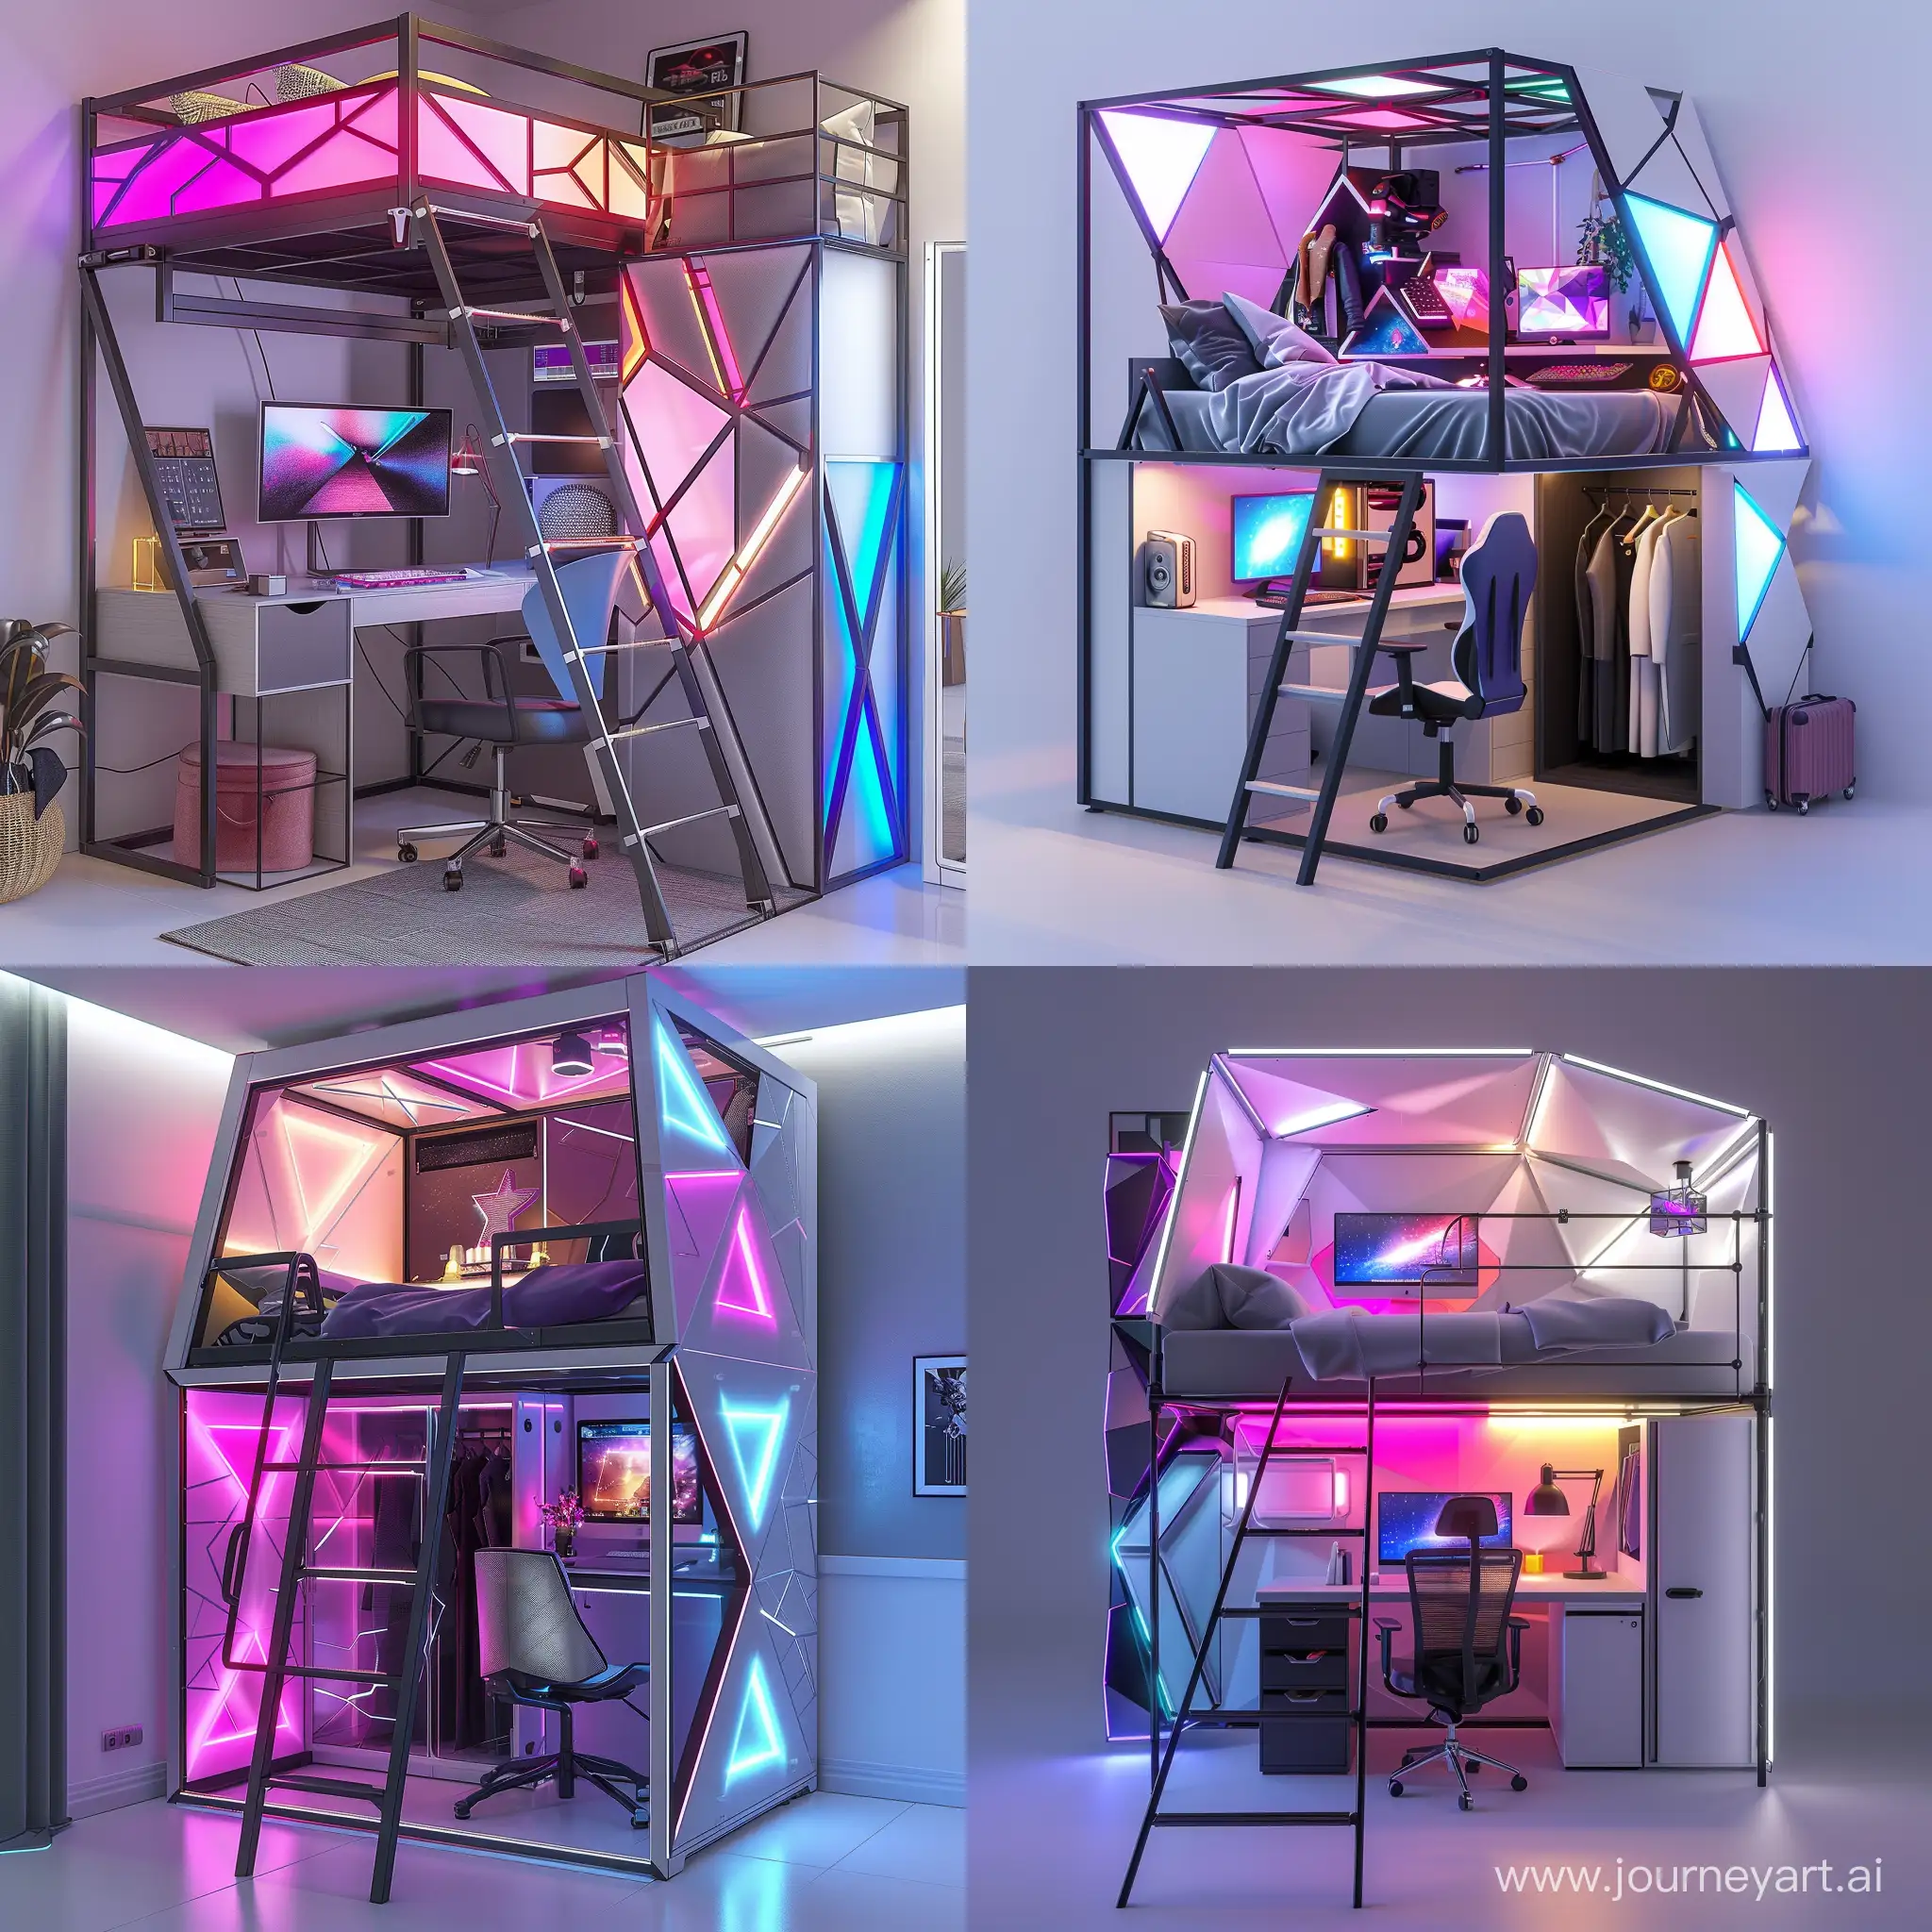 A unit for gamers containing tow levels , in the first level a bed 10 centimeters high from the ground. a ladder that leads to an second upper part without bed that contains desk with a computer and chair, wardrobe next to it. The structure of the unit is made of iron in a modern space style. It contains strong lighting in  geometric shapes in bright pink, purple and blue colors. The dimensions of the unit are 3 meters and 150 cm, with a height of 3 meters. The colors of the unit are white and gray.